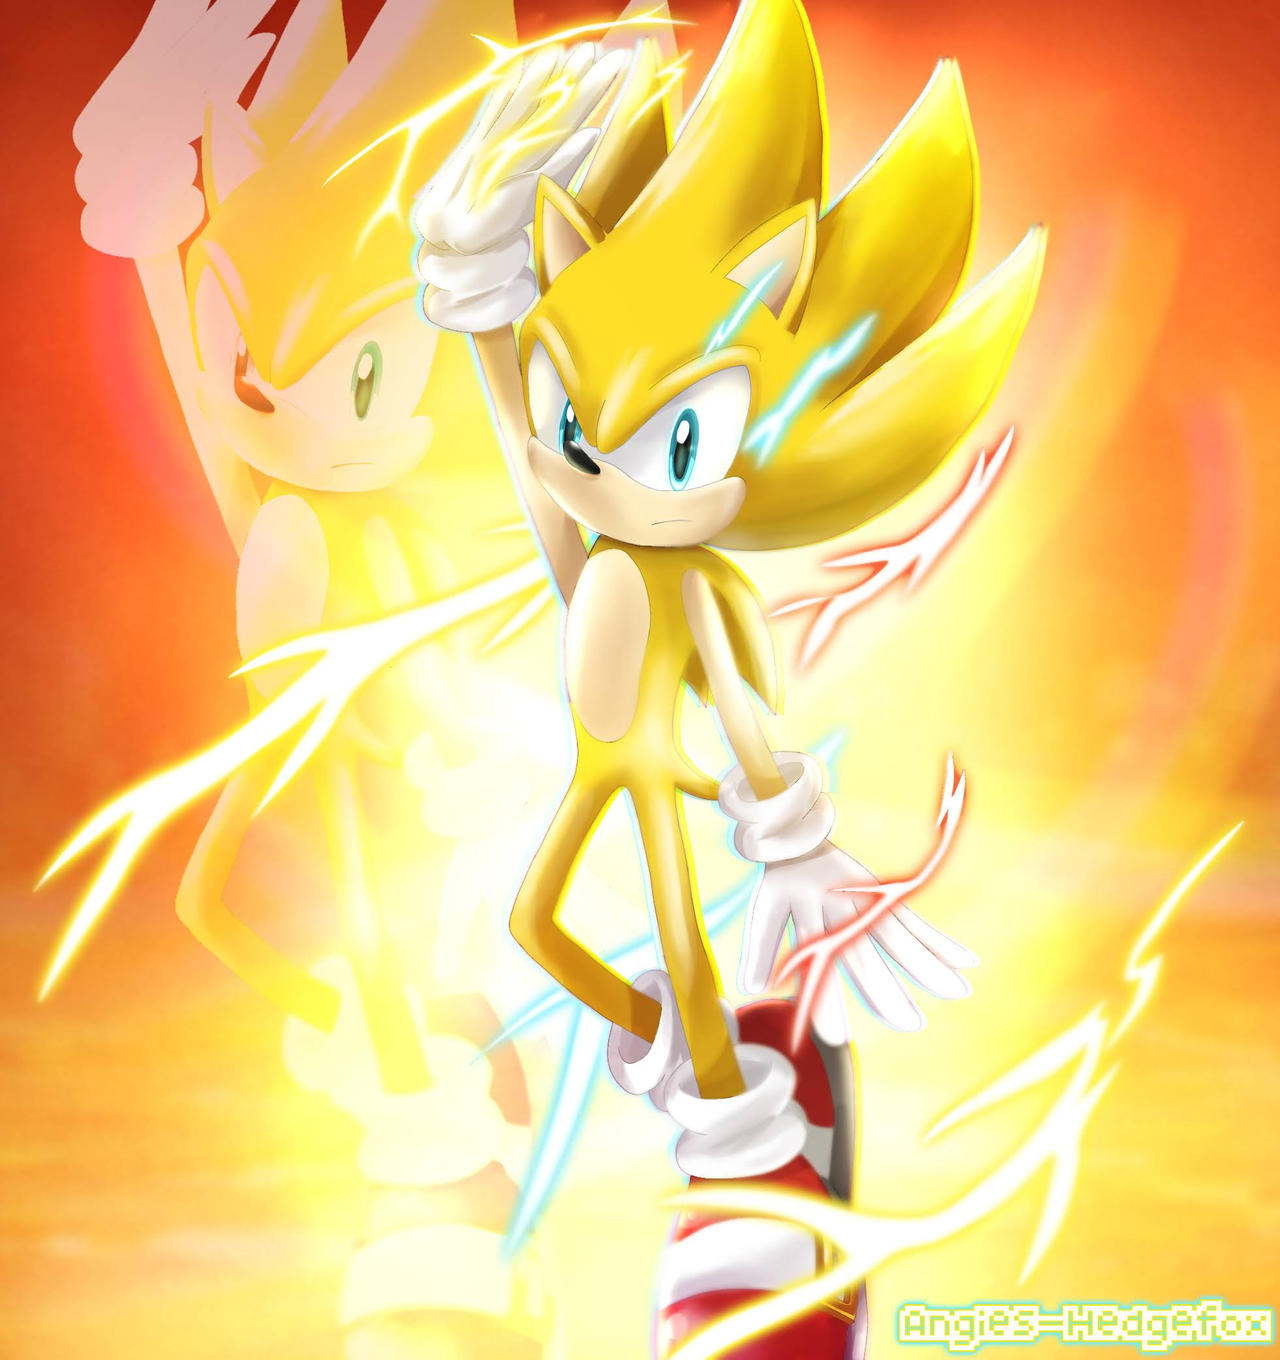 How to become Super Sonic in Sonic Superstars explained